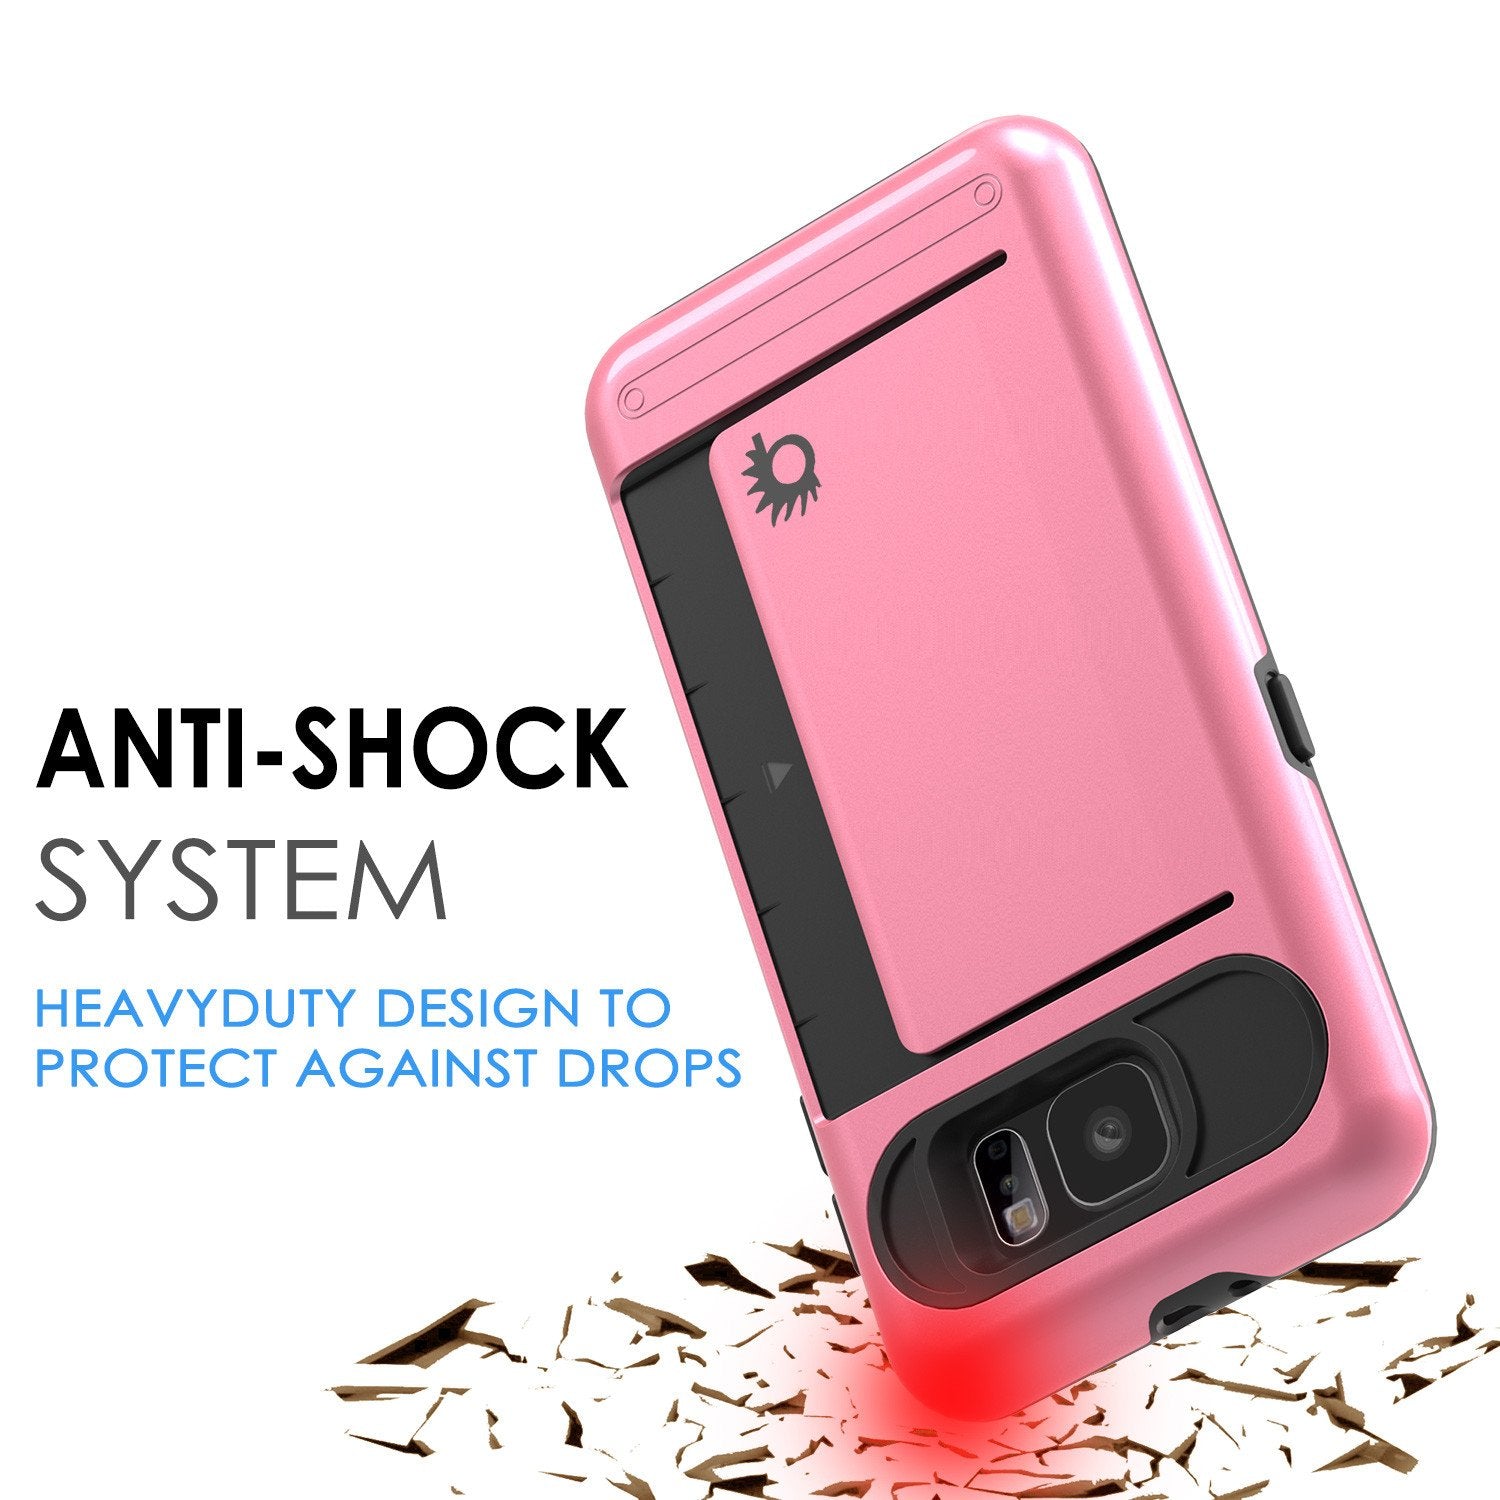 Galaxy s6 Case PunkCase CLUTCH Pink Series Slim Armor Soft Cover Case w/ Tempered Glass